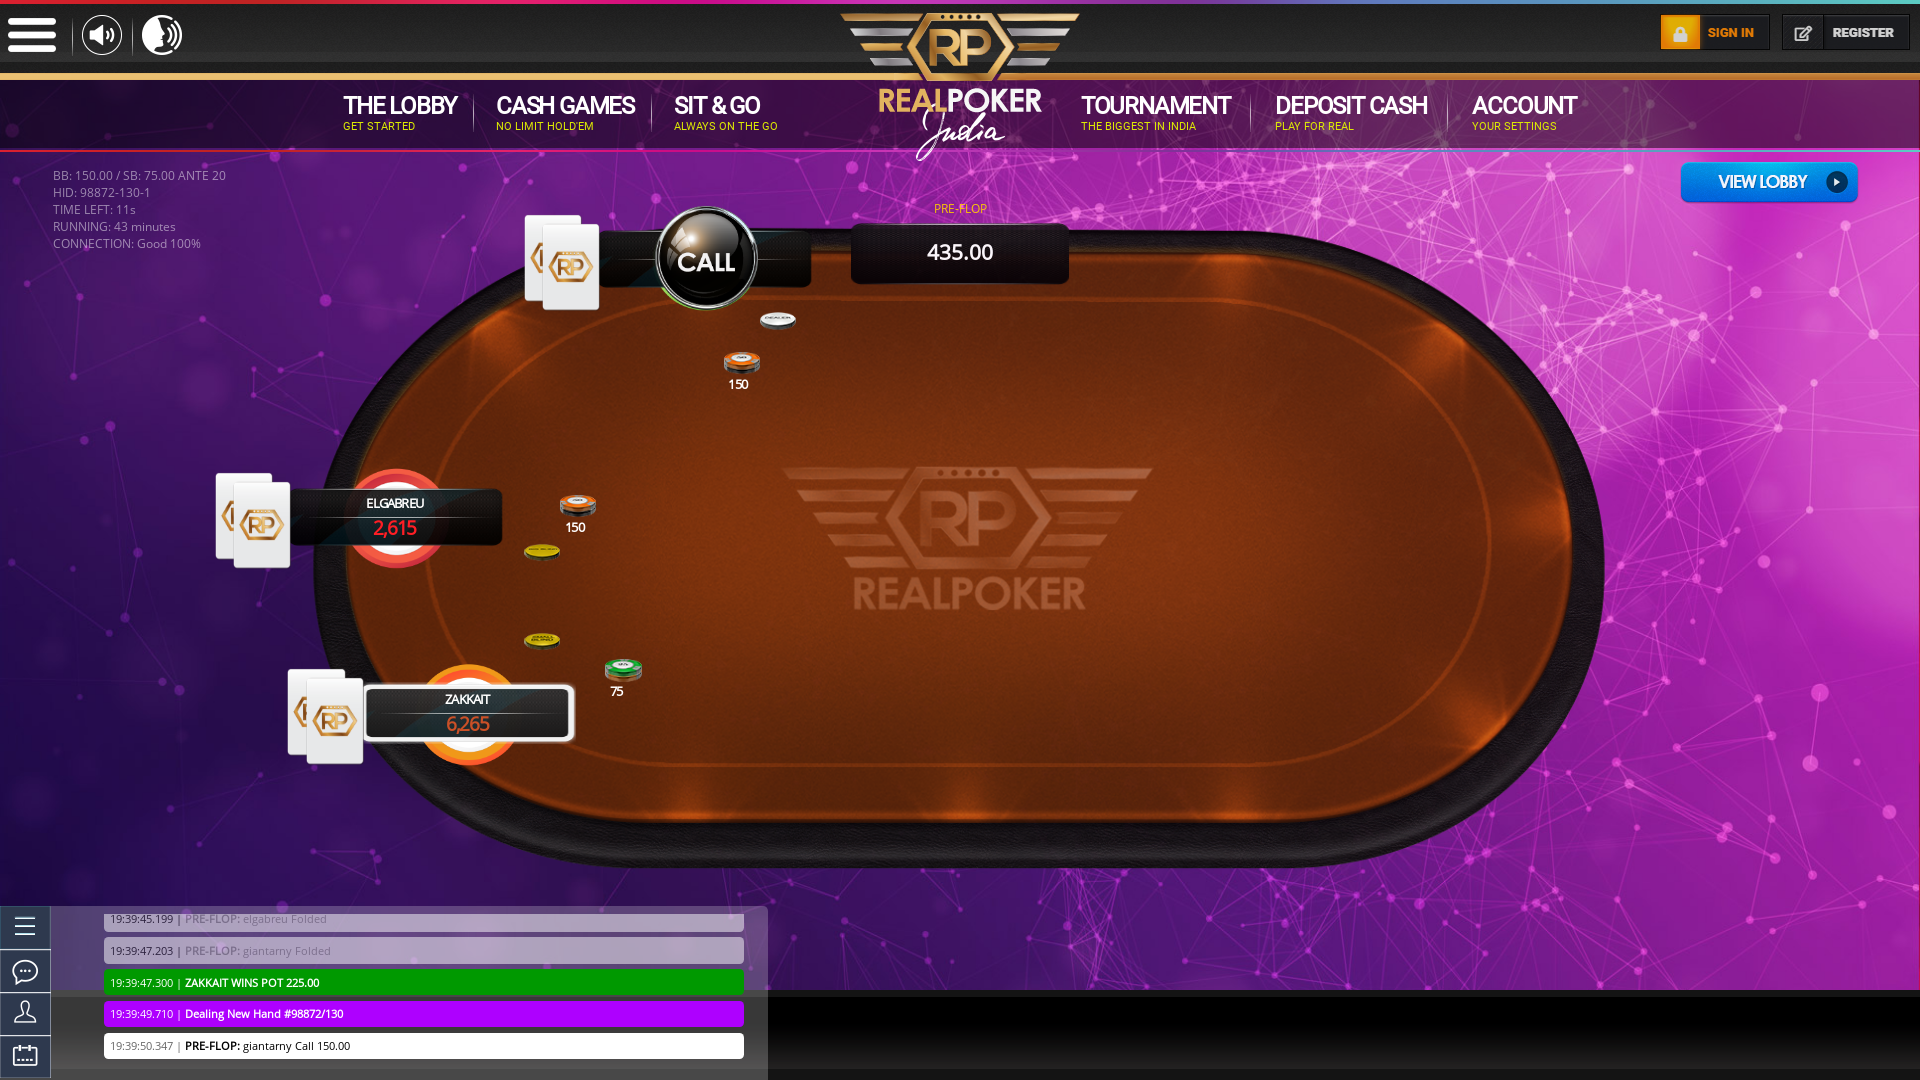 10 player texas holdem table at real poker with the table id 98872